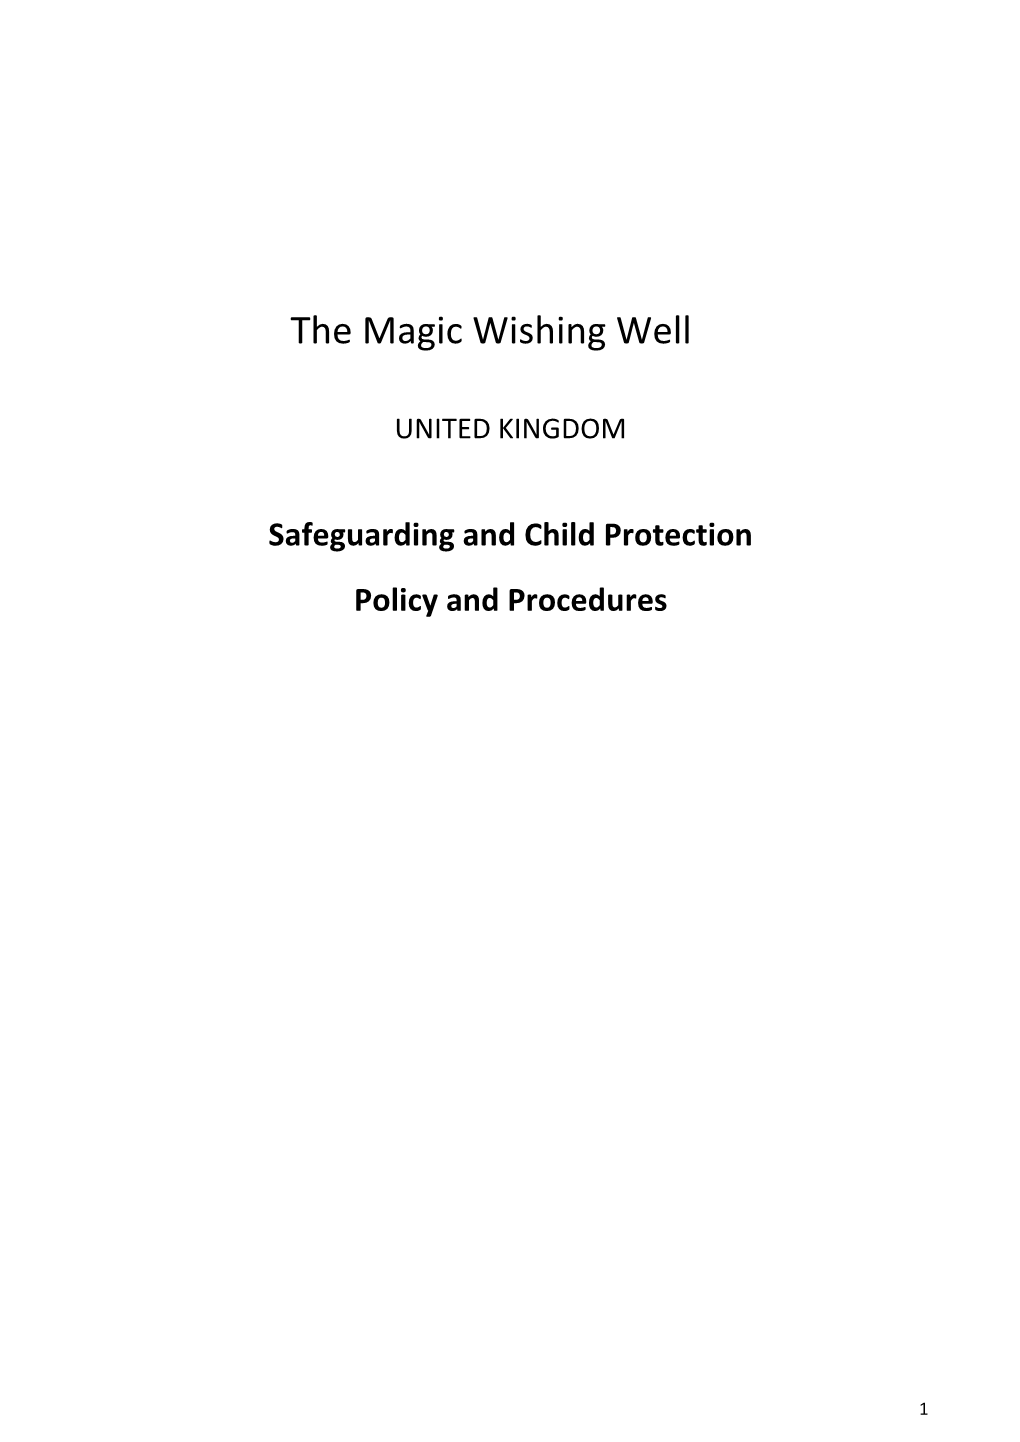 Safeguarding and Child Protection Policy and Procedures